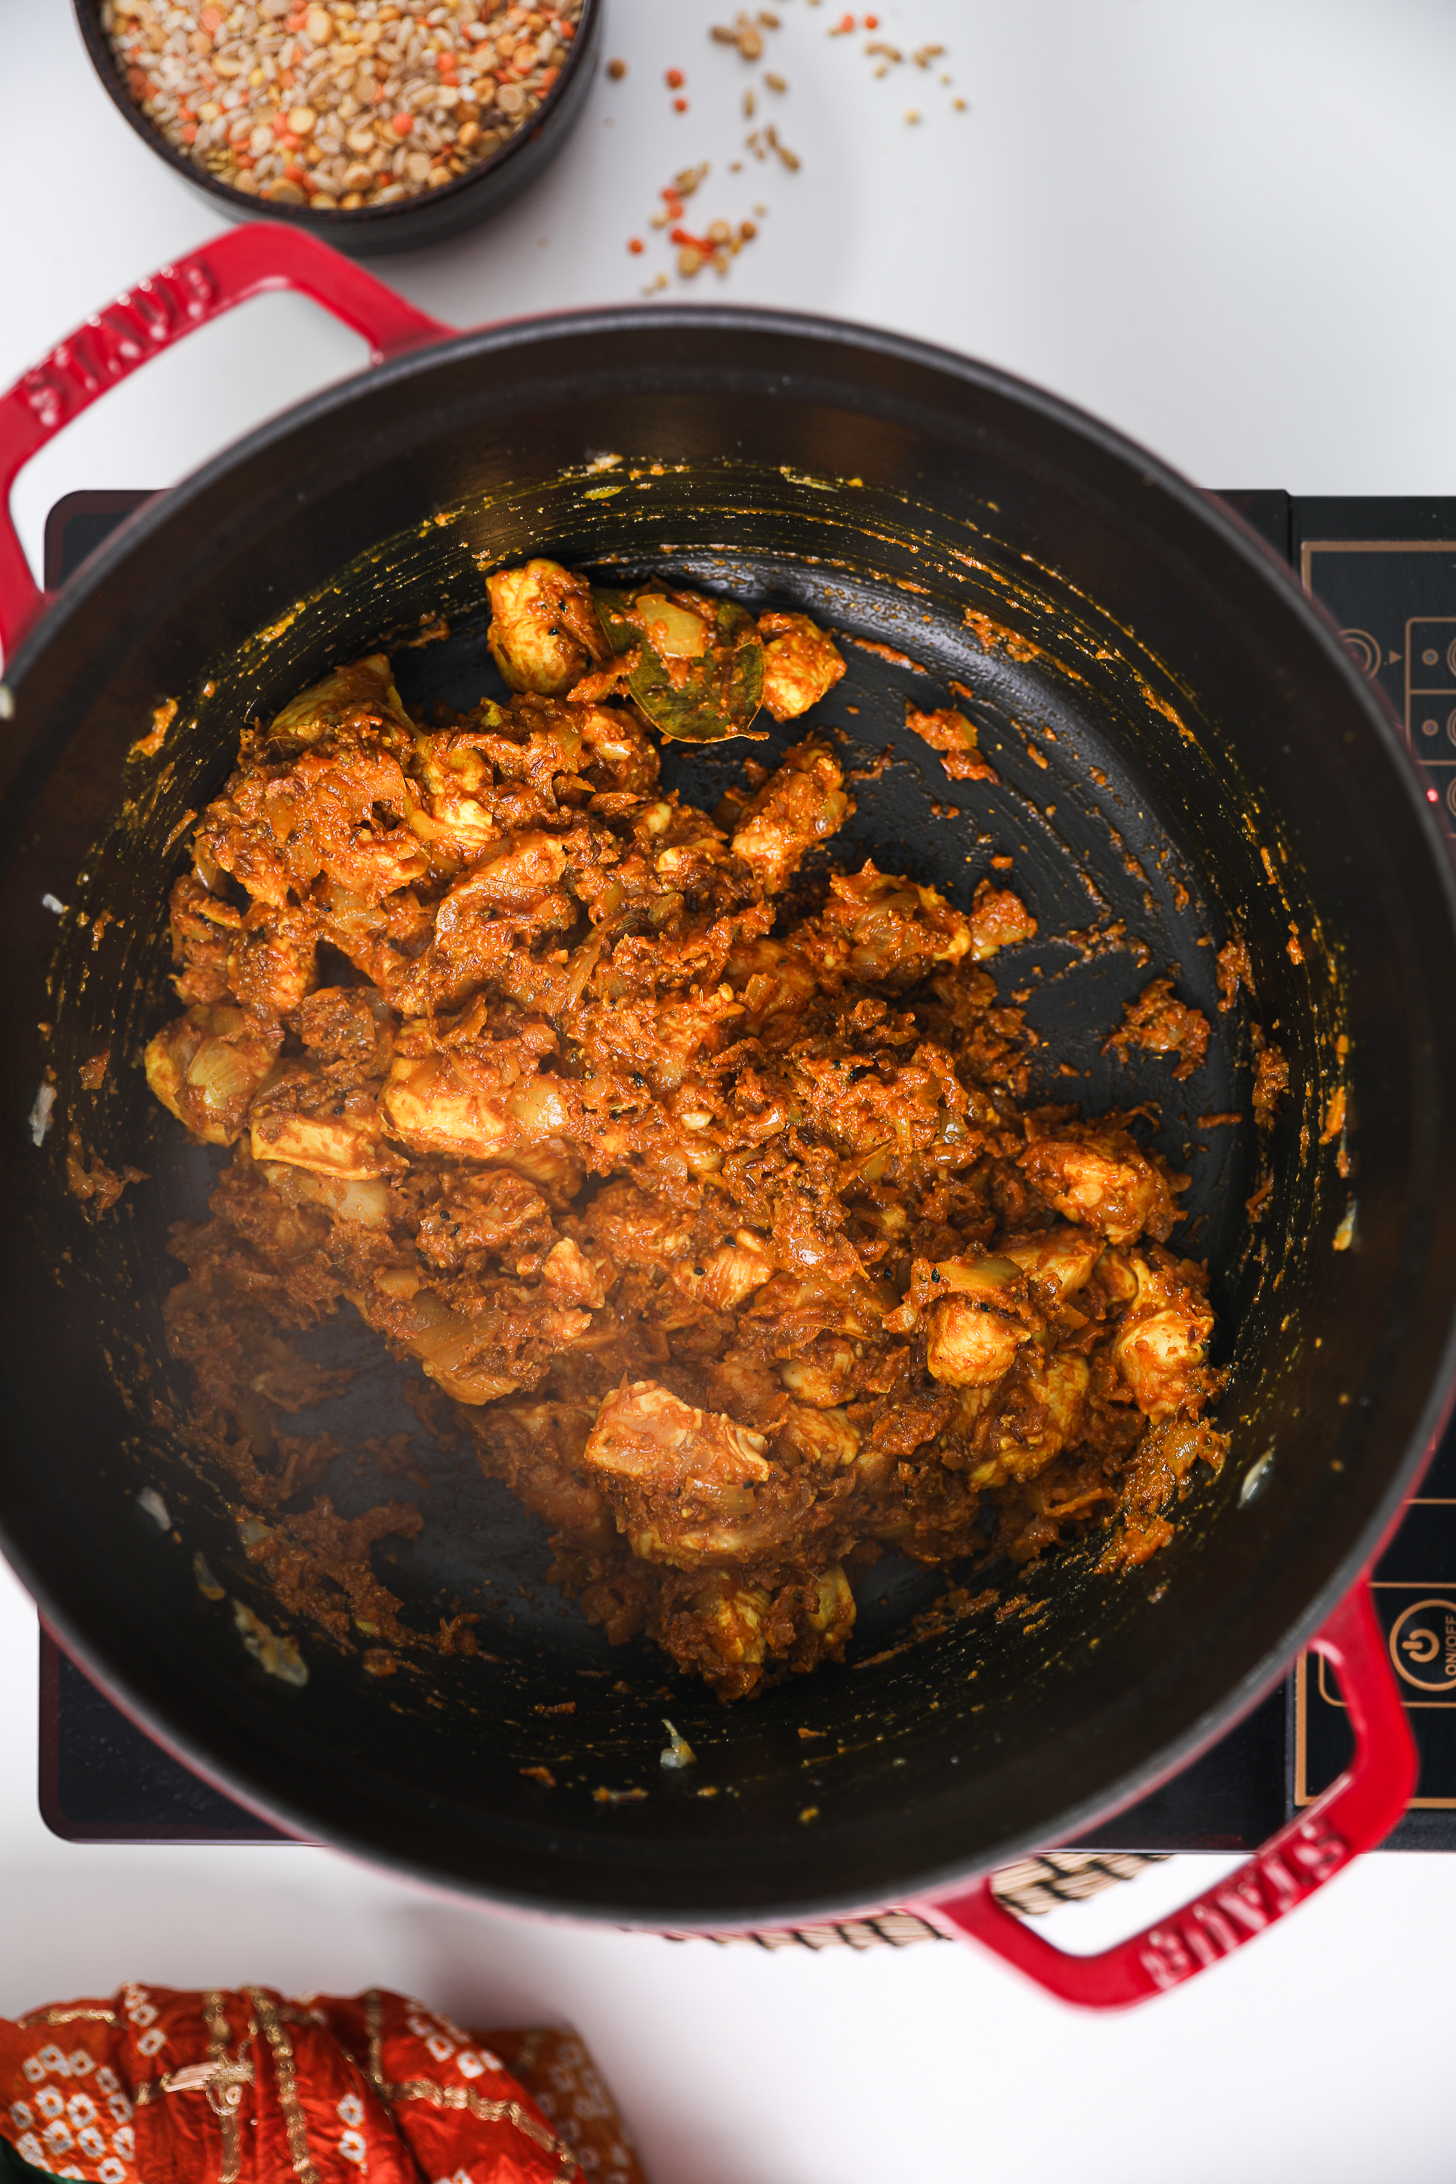 Spice-coated chicken breast chunks in a cooking pot.